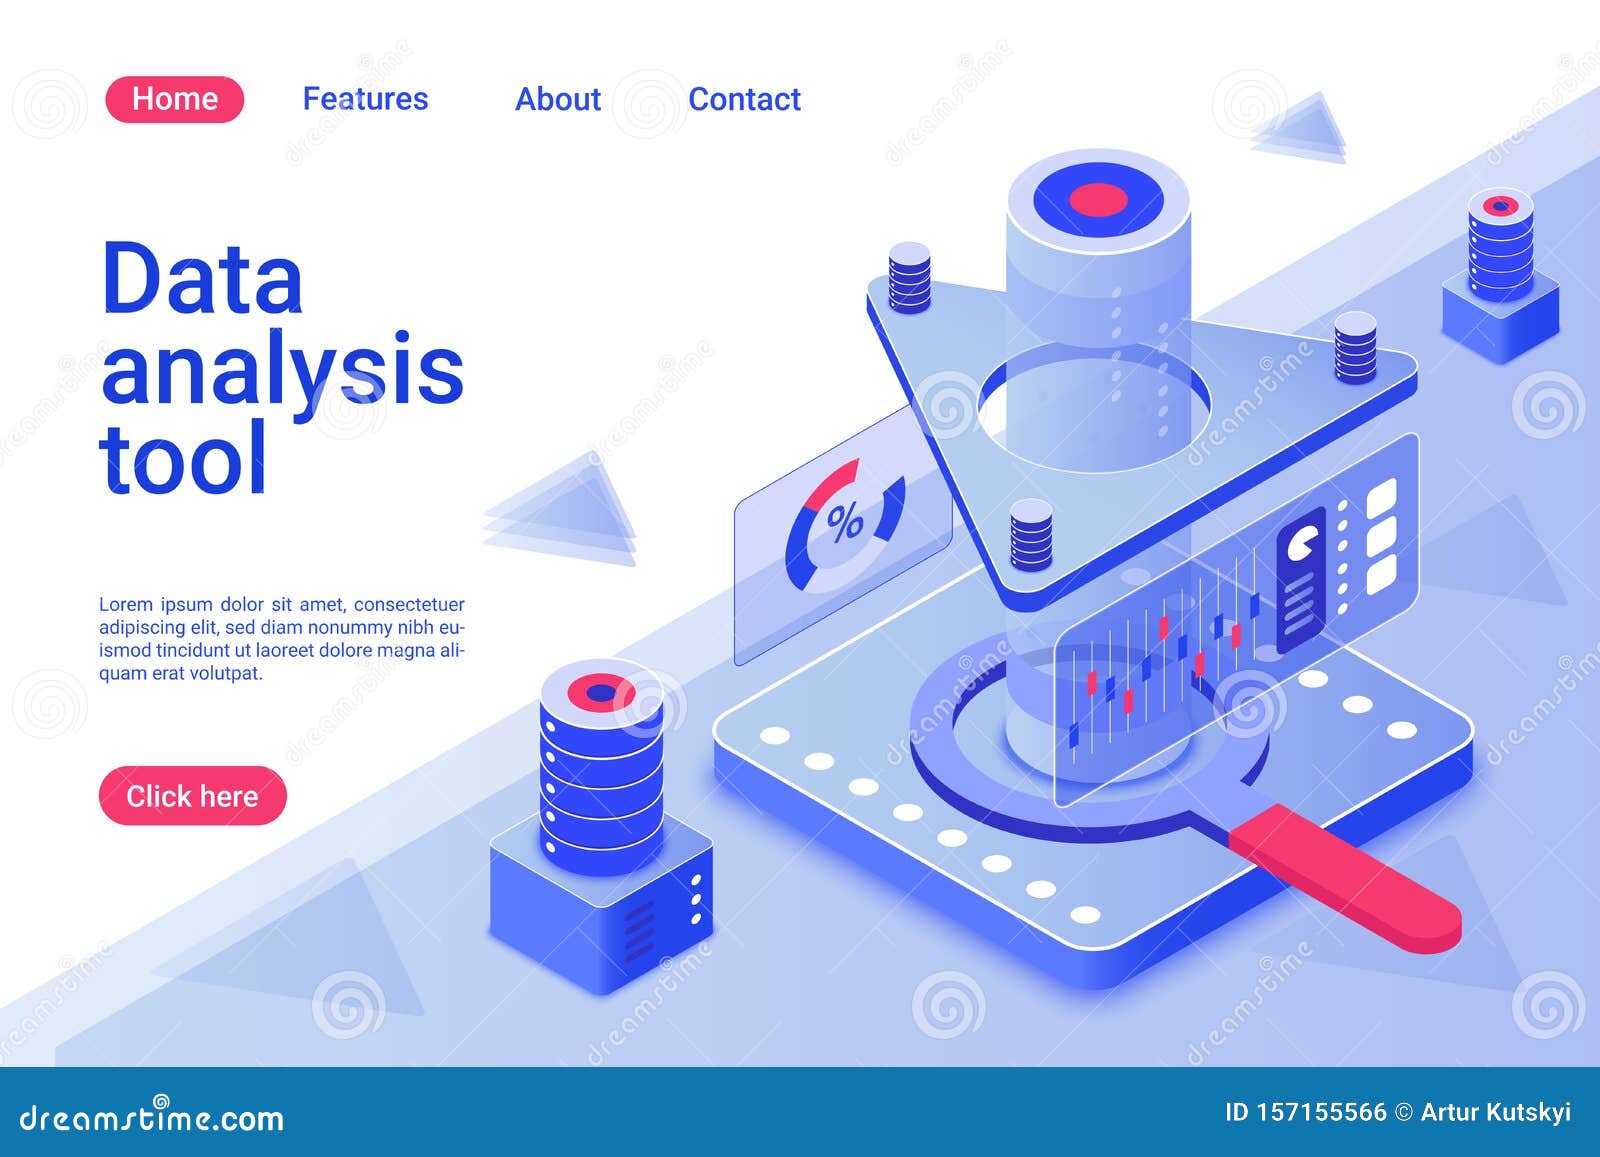 what are tools for data analysis